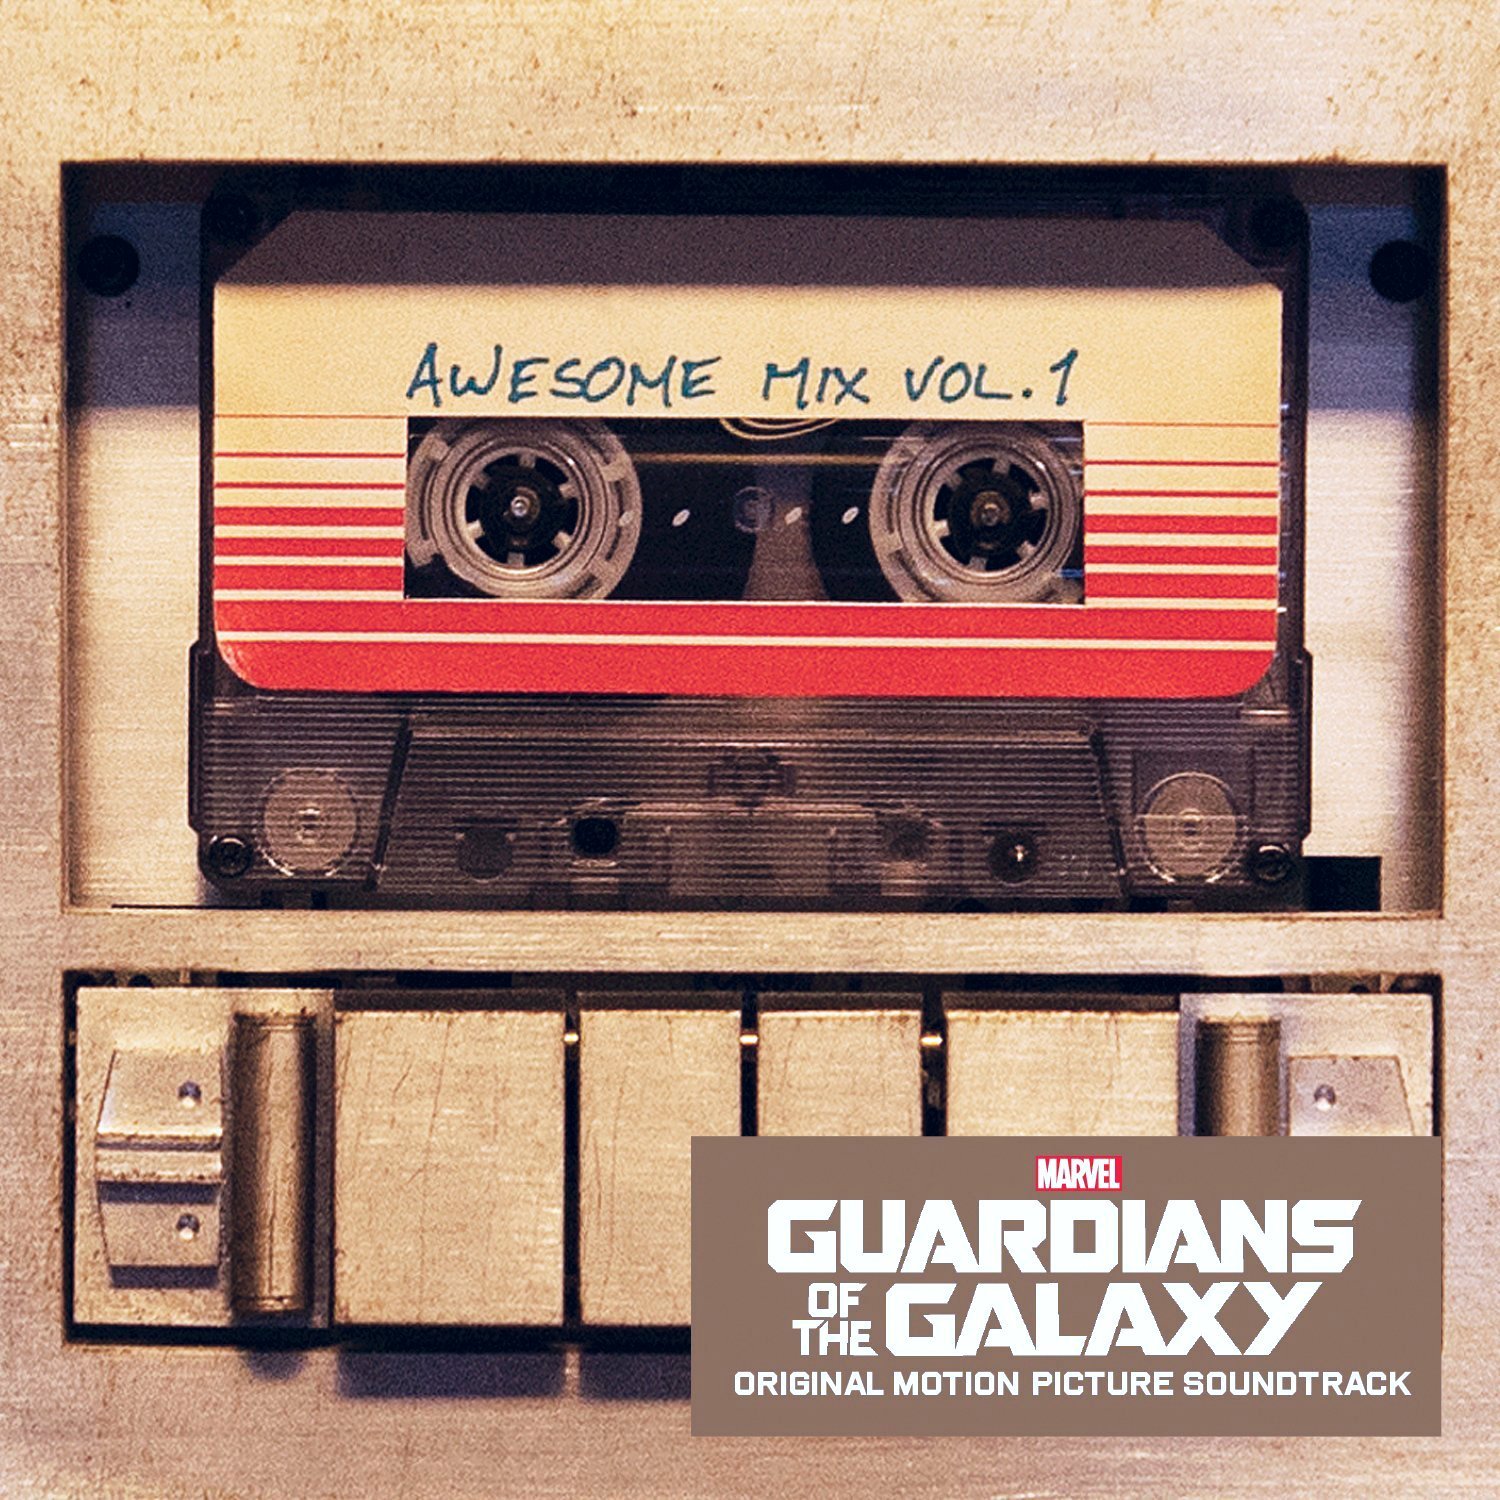  GUARDIANS OF THE GALAXY - AWESOME MIX VOL 1 $26 @ 2014 Hollywood Records  